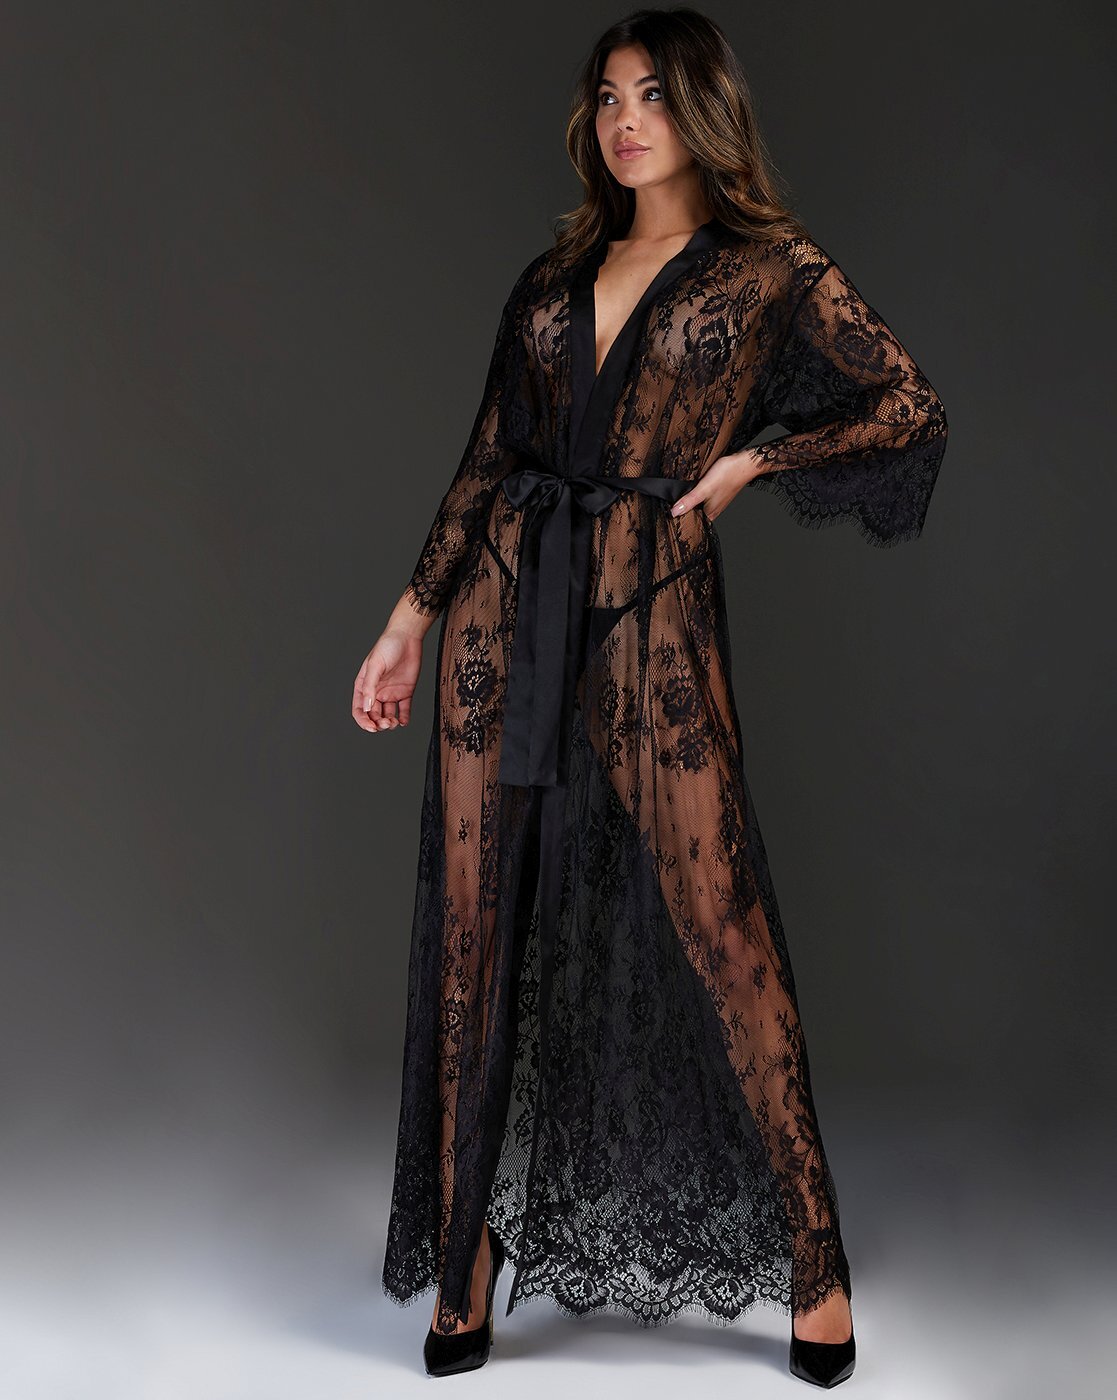 Hooded Black Modal Robe - Grace and Lace